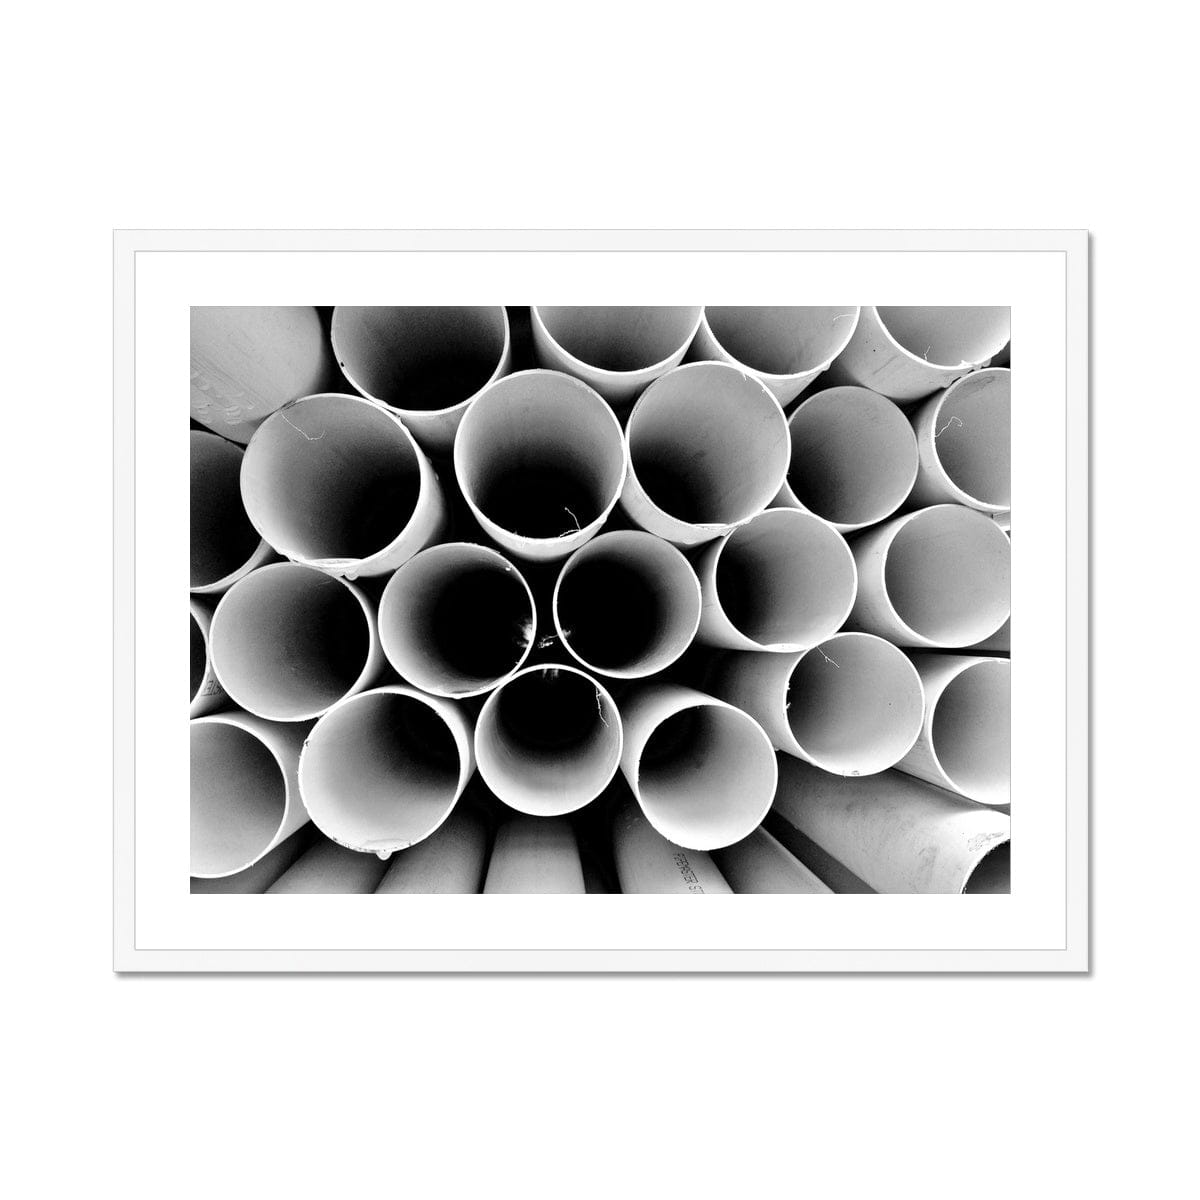 Seek & Ramble Framed A4 Landscape (29x21cm) / White Frame Monochrome Round Pipes Abstract Framed & Mounted Print